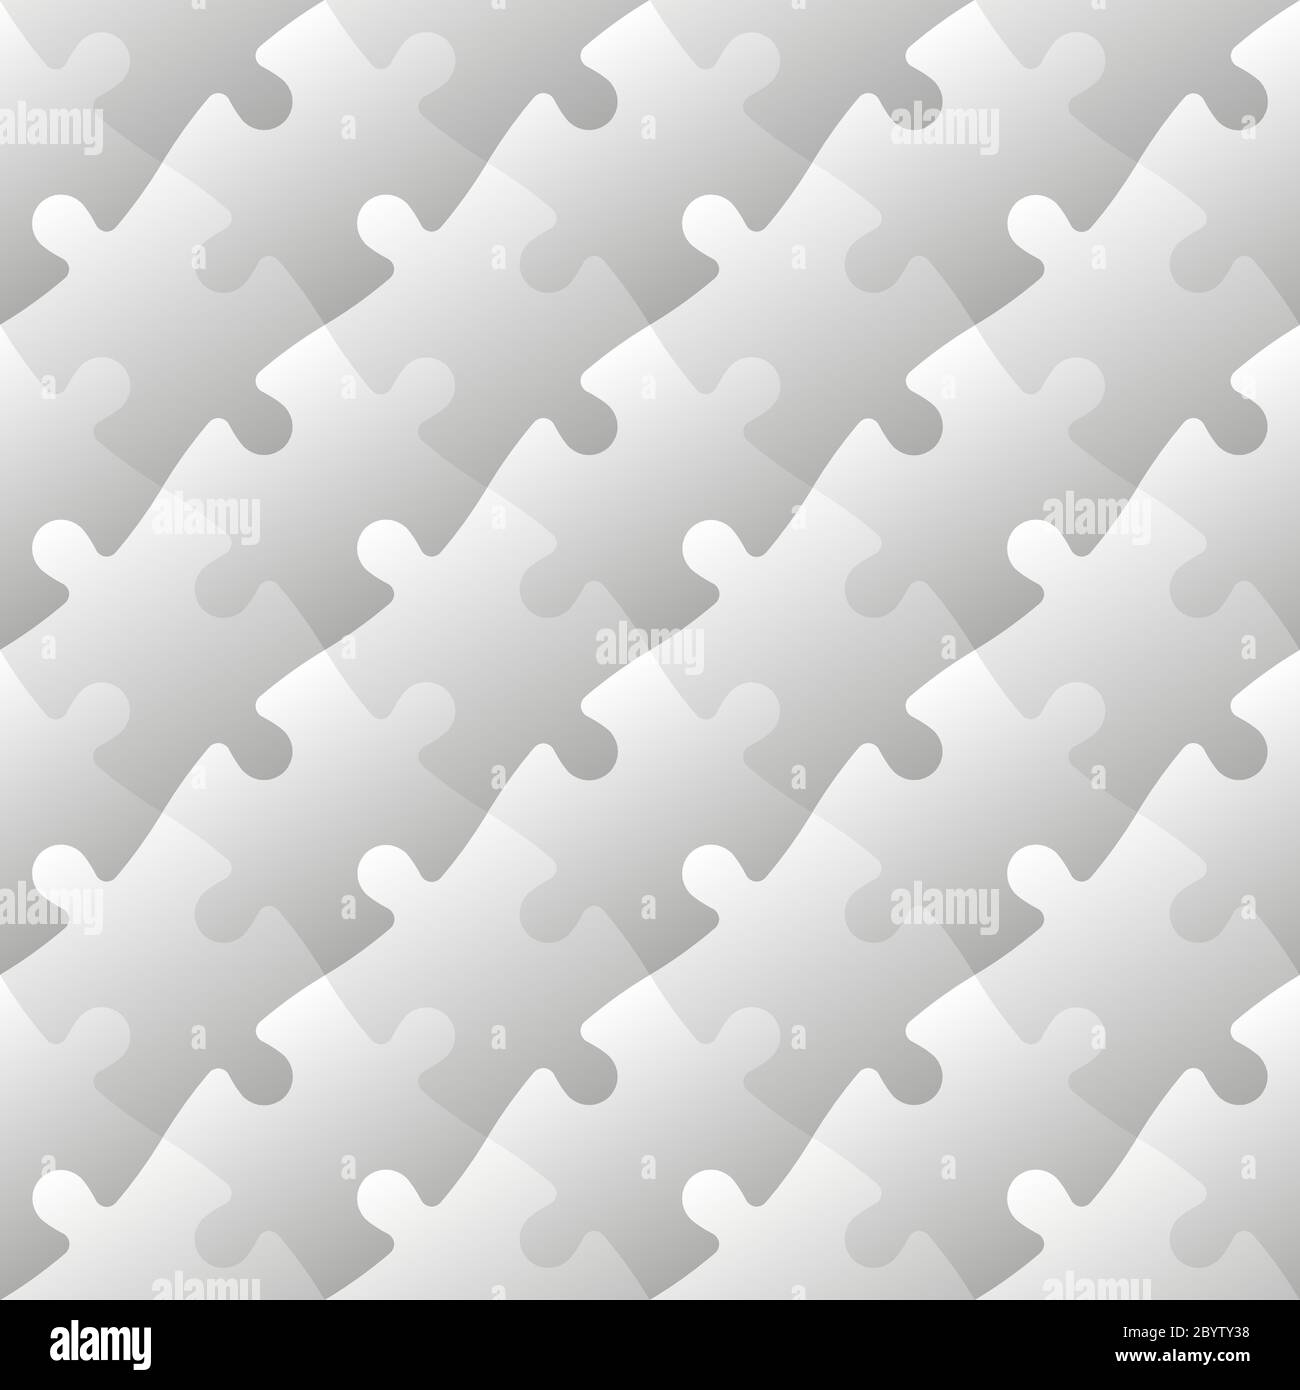 Jigsaw puzzle mosaic seamless background. Each of puzzle pieces in diagonal arrangement has own grey gradient. Simple flat vector illustration. Stock Vector